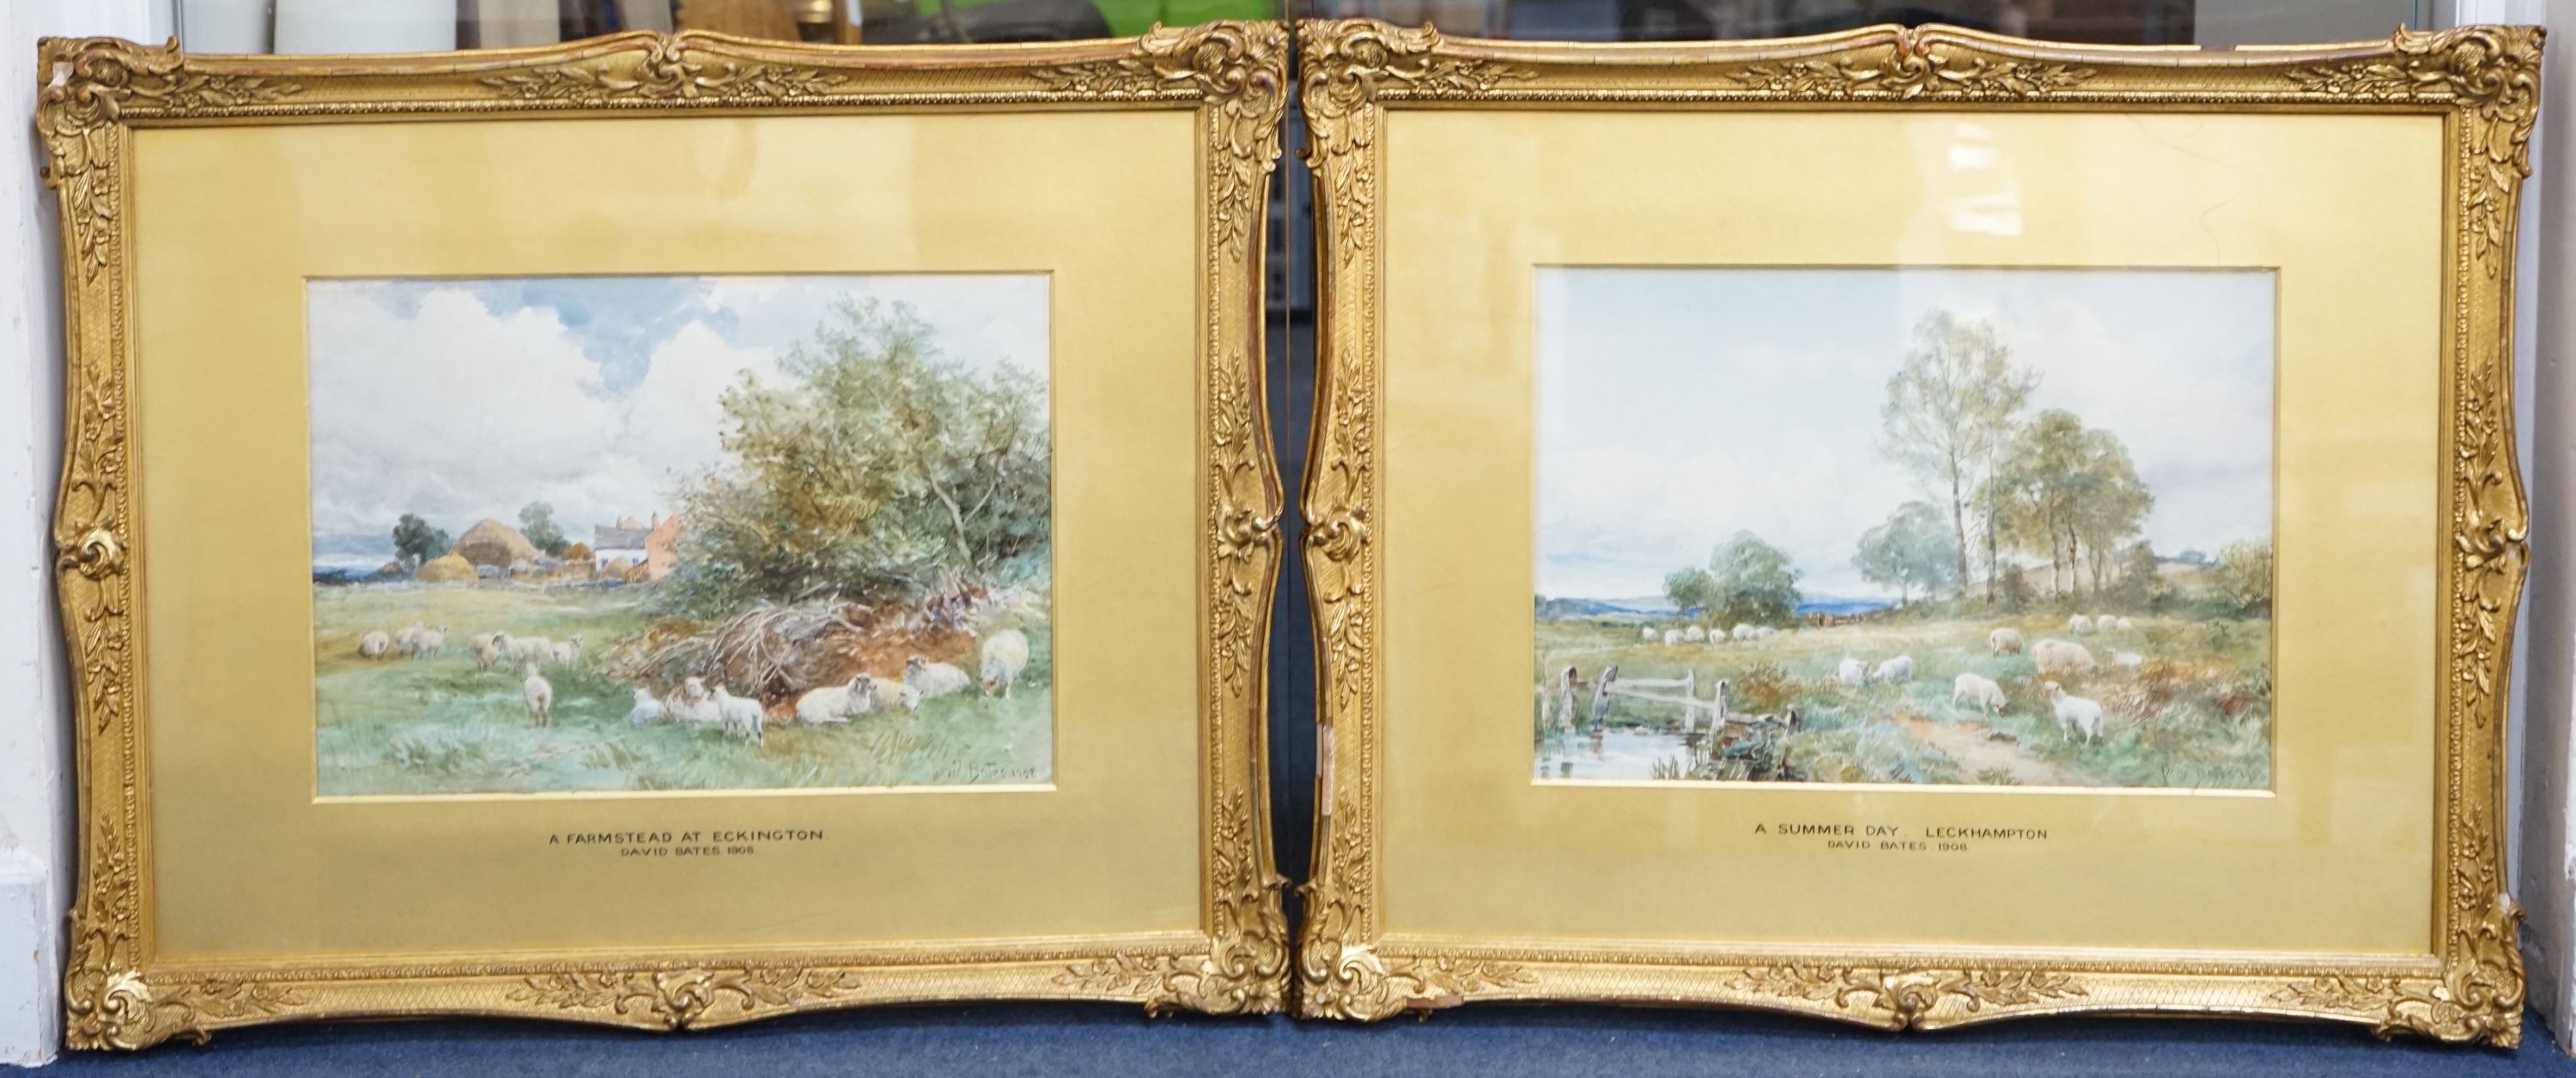 David Bates (1840-1921), pair of watercolours, 'A Summer Day, Leckhampton' and 'A Farmstead at Eckington', signed and dated 1908, 25 x 35cm